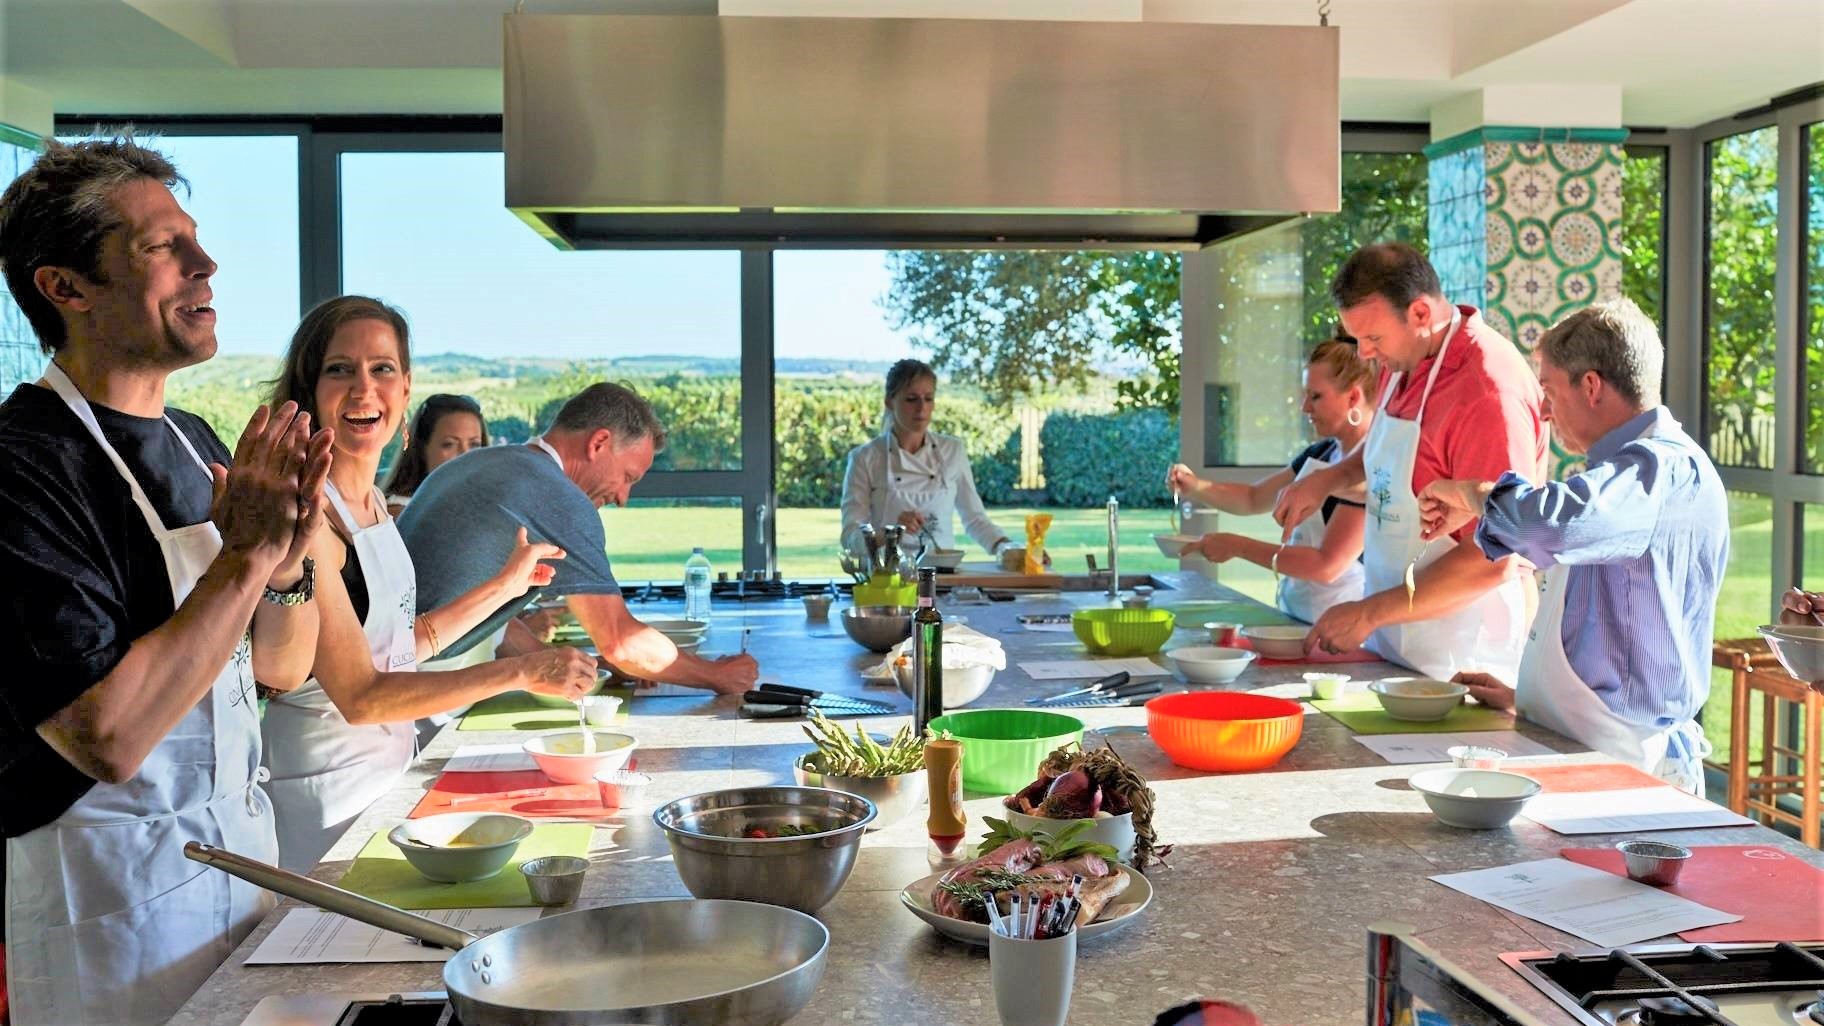 A Splendid Villa In The Roman Countryside For A Culinary Vacation Of A Lifetime!